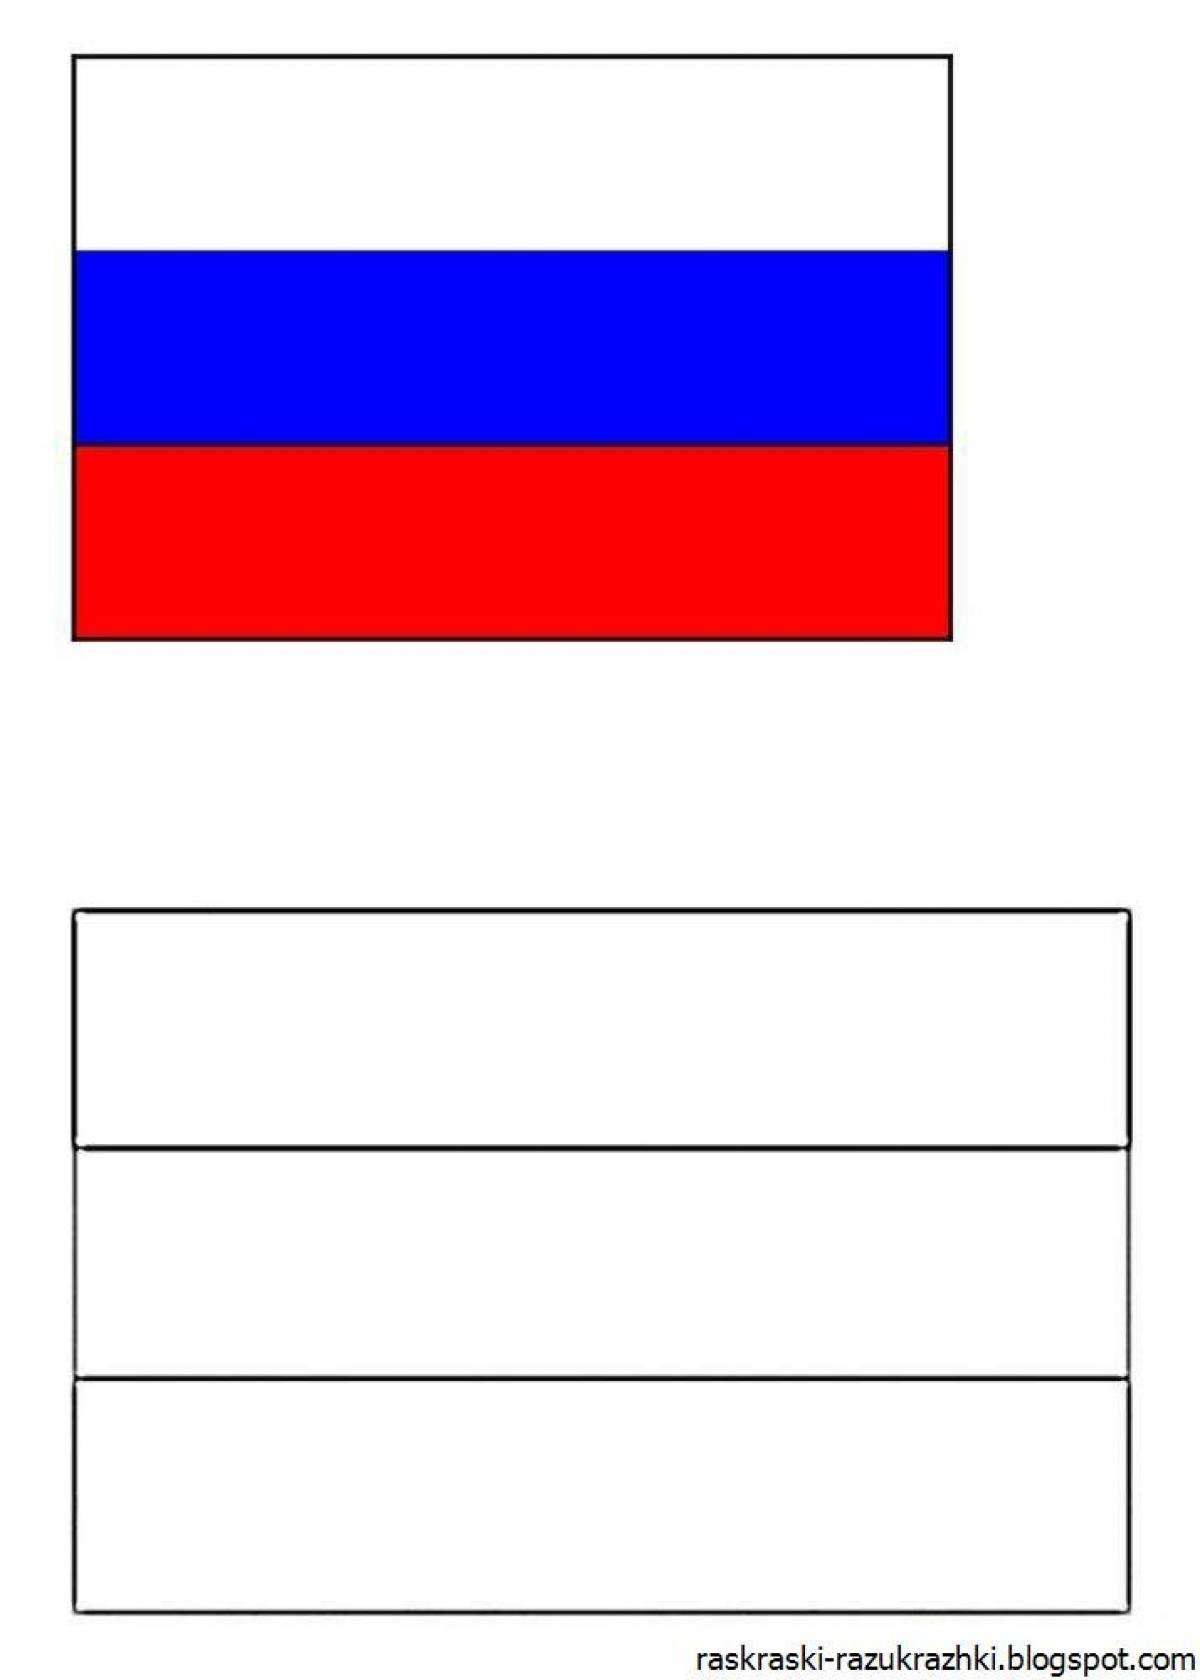 Playful Russian flag coloring page